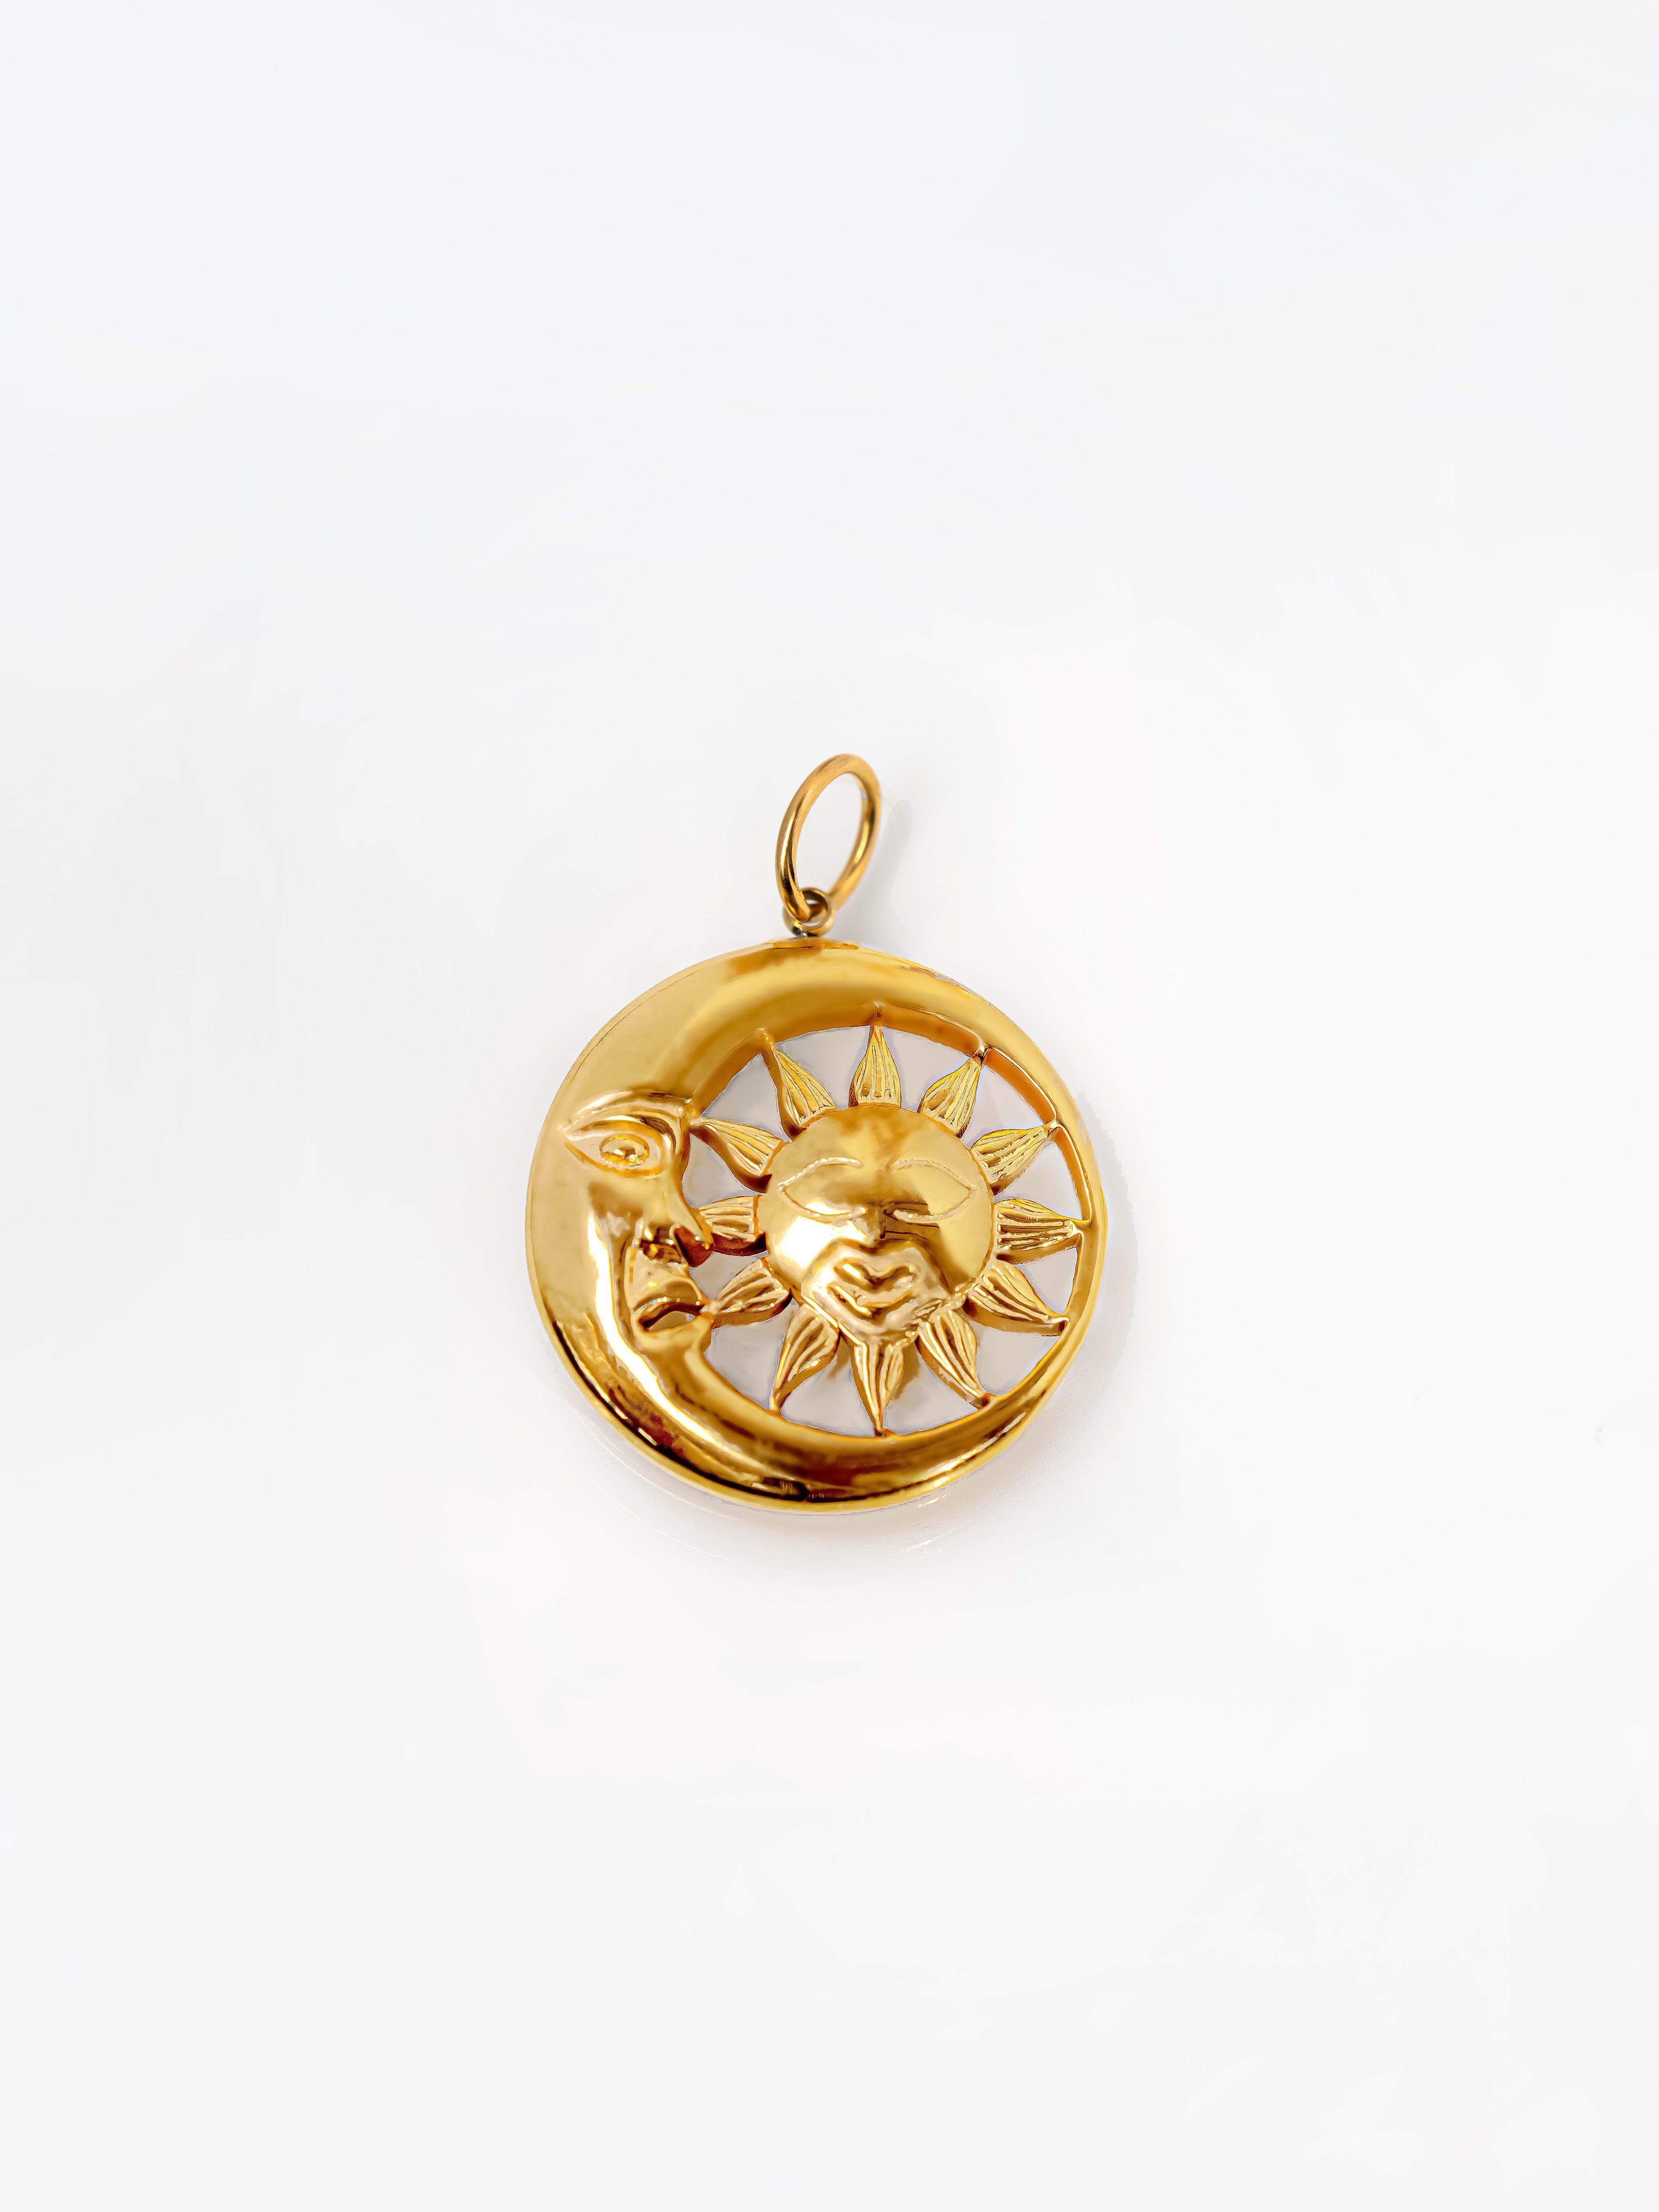 Gold Moon and Sun Coin Pendant / Charm